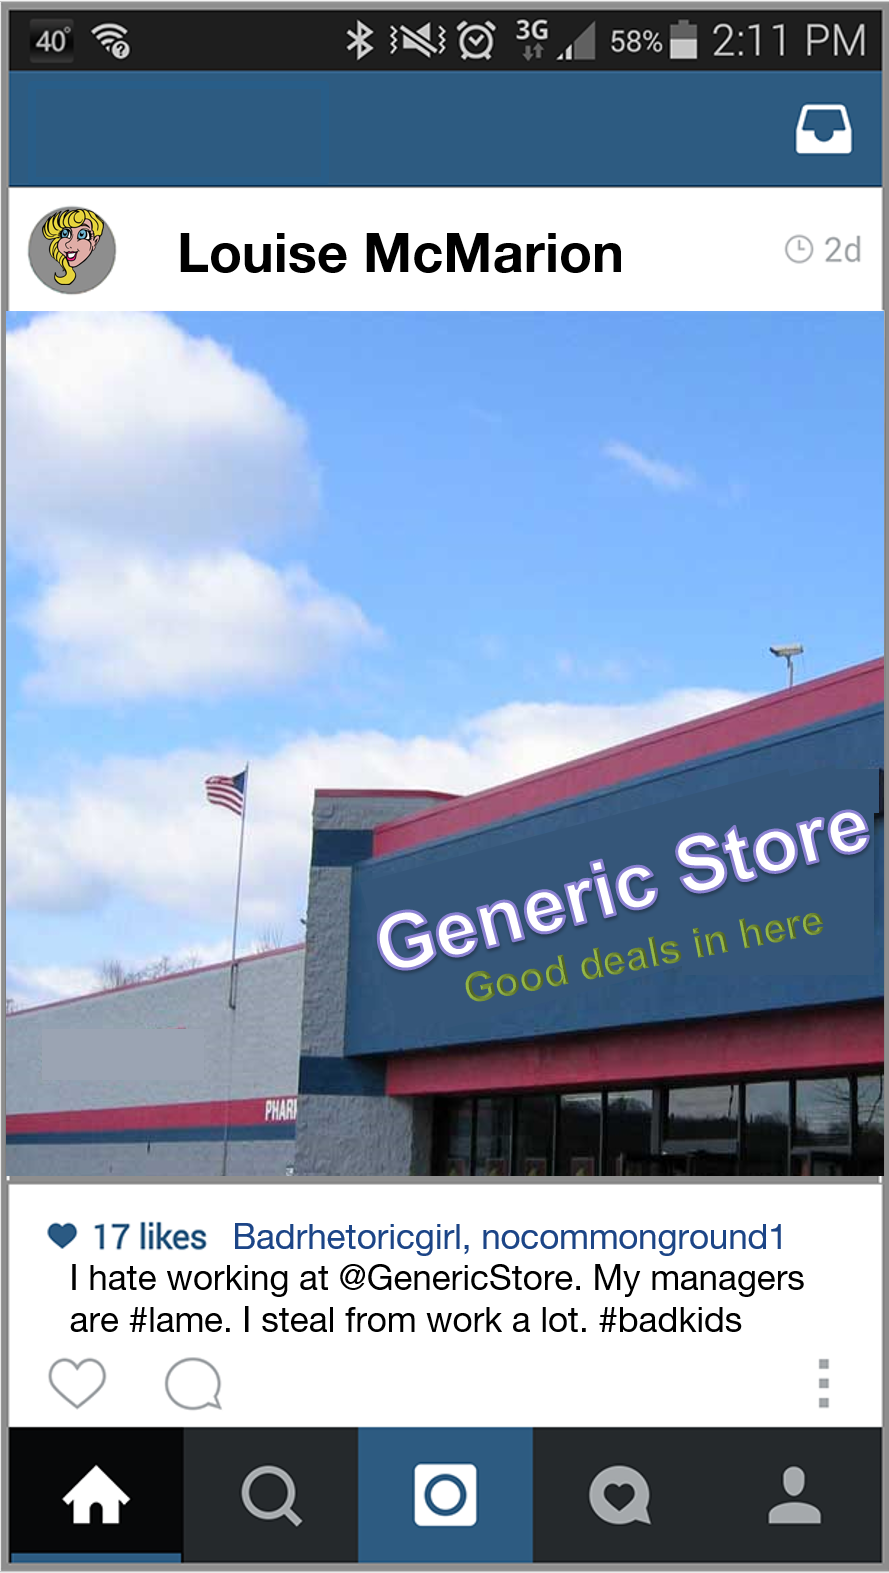 Instagram post by fictional person "Louise McMarion" that says, "I hat working at @Genericstore. My namagers are #lame. I steal from work a lot. #badkids".